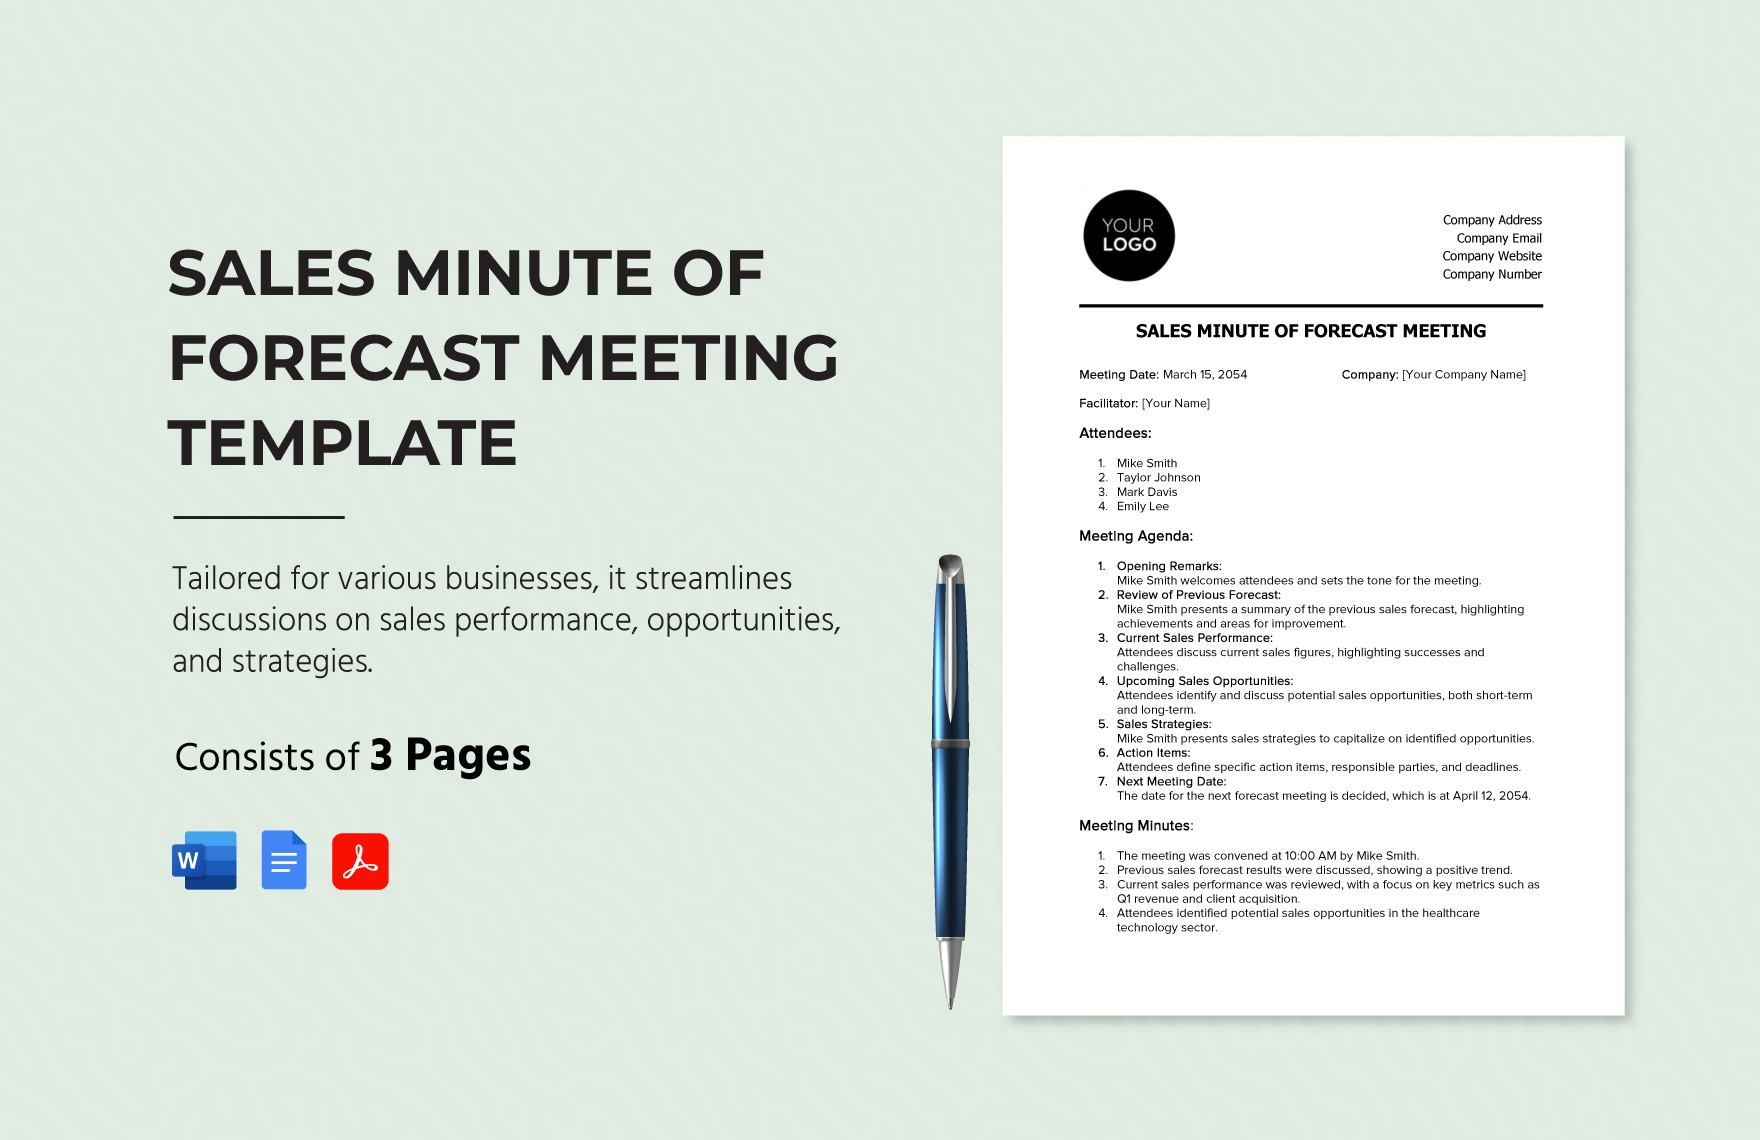 Sales Minute of Forecast Meeting Template